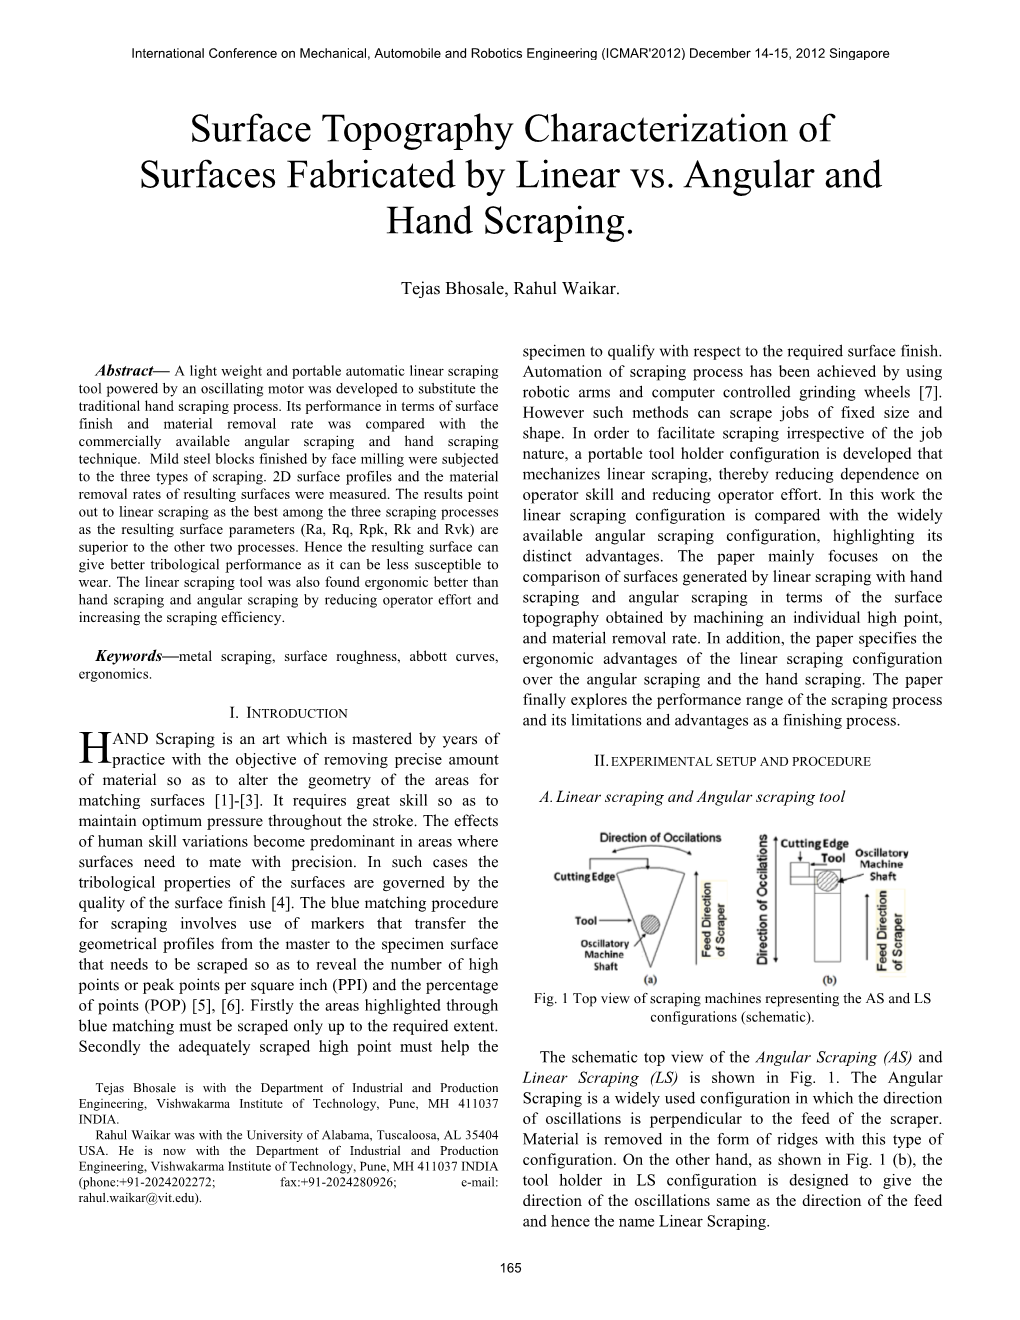 Surface Topography Characterization of Surfaces Fabricated by Linear Vs